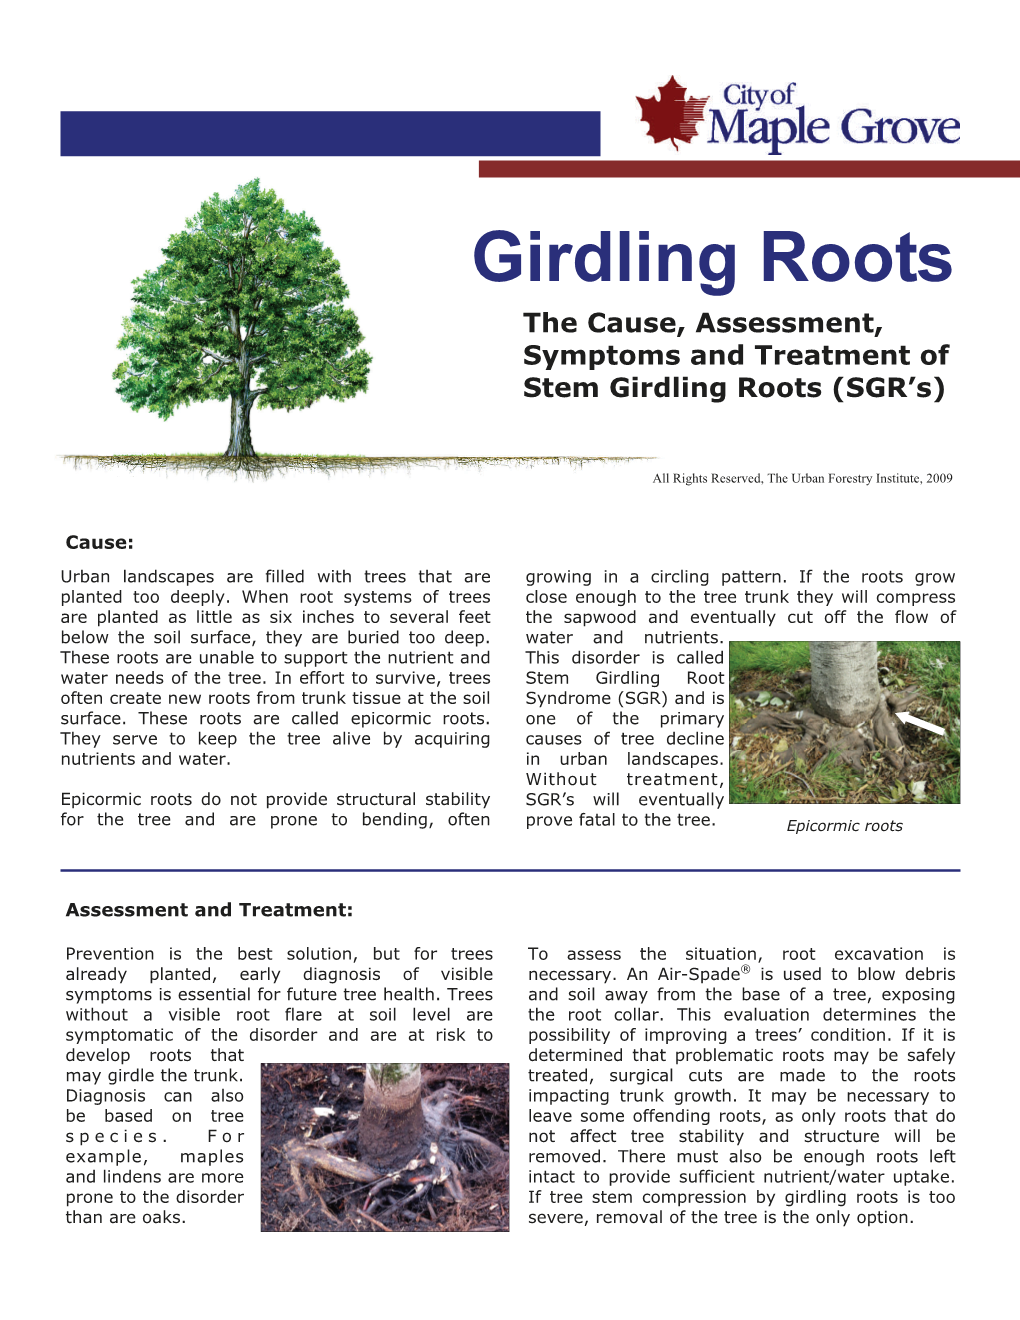 Girdling Roots the Cause, Assessment, Symptoms and Treatment of Stem Girdling Roots (SGR’S)